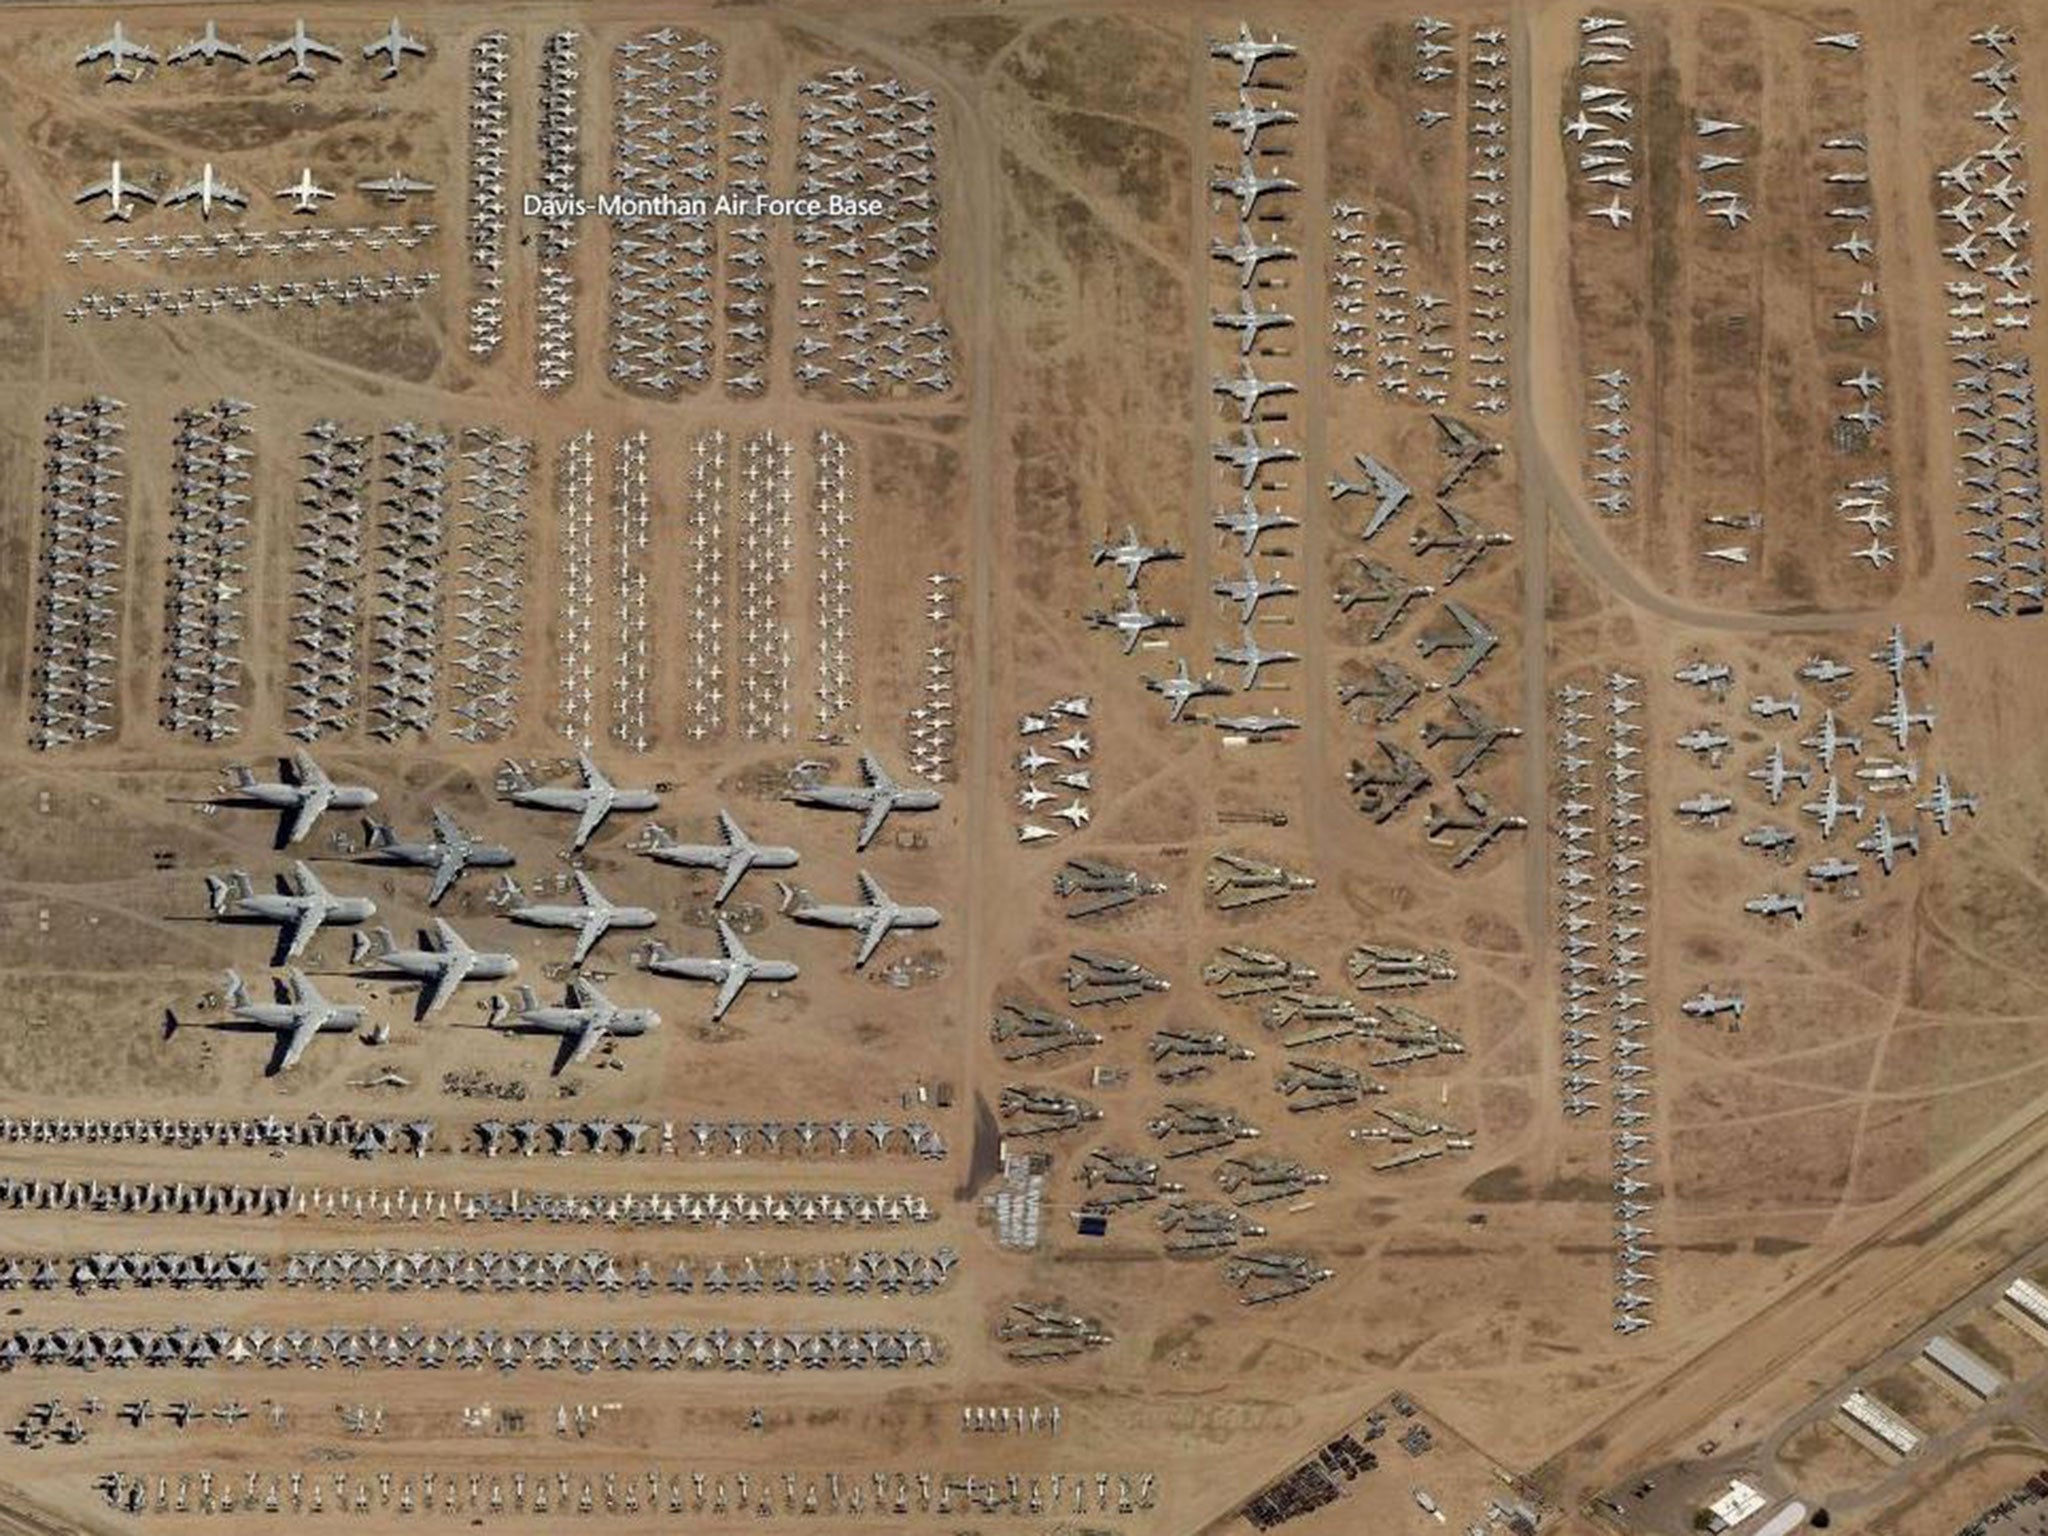 'The Boneyard' at the Davis-Monthan Air Force Base in Arizona houses 4,400 planes